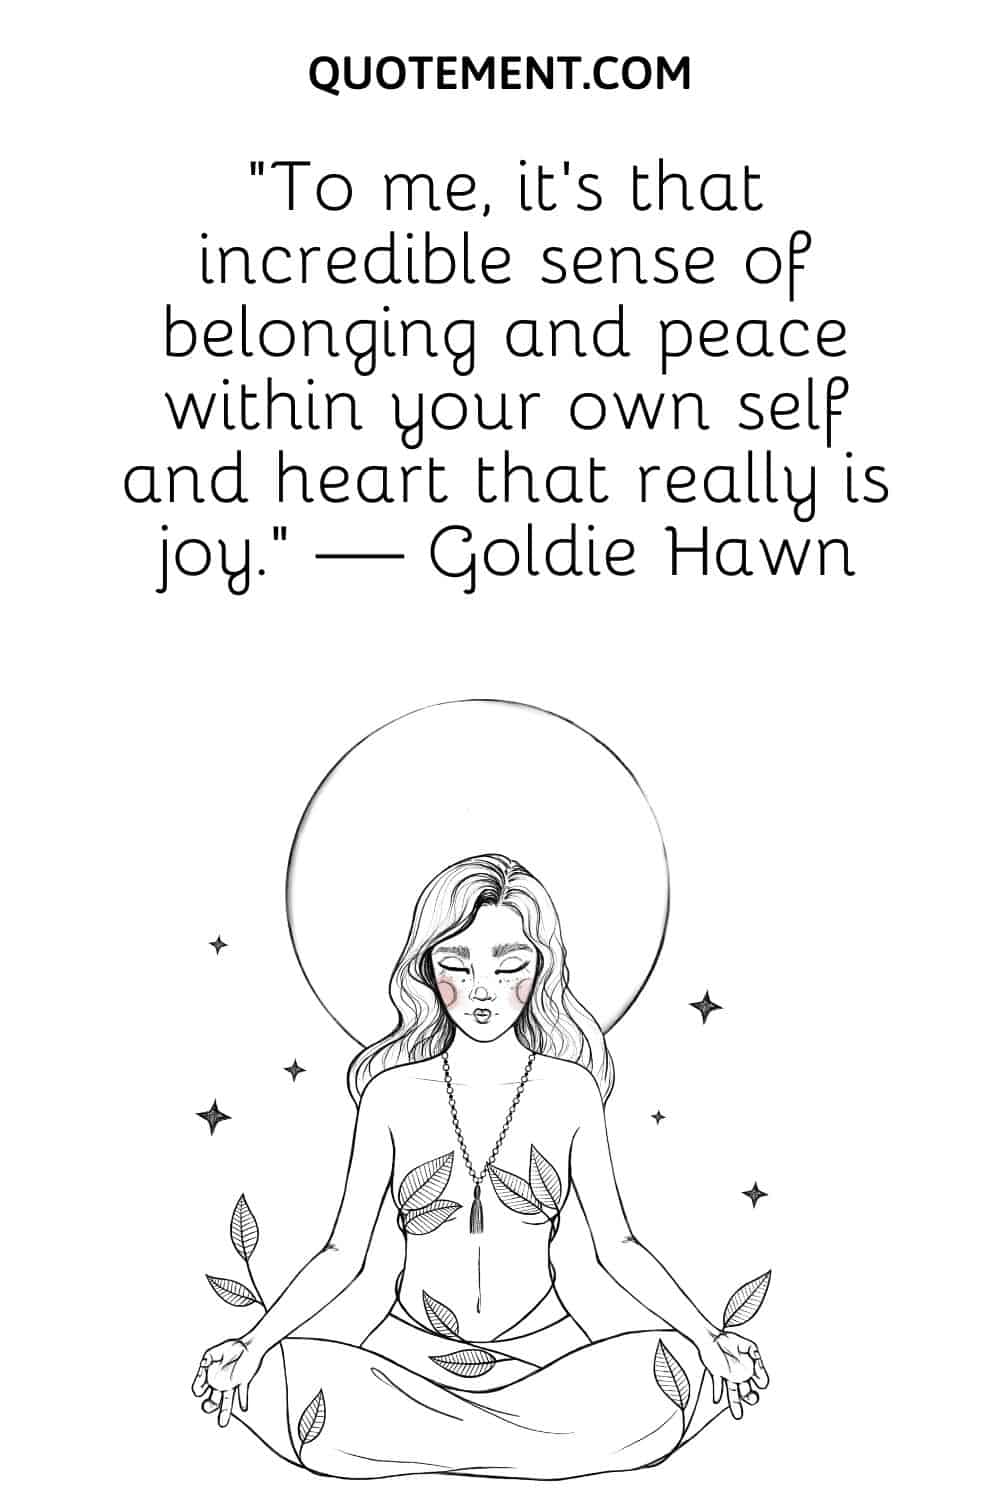 To me, it's that incredible sense of belonging and peace within your own self and heart that really is joy.